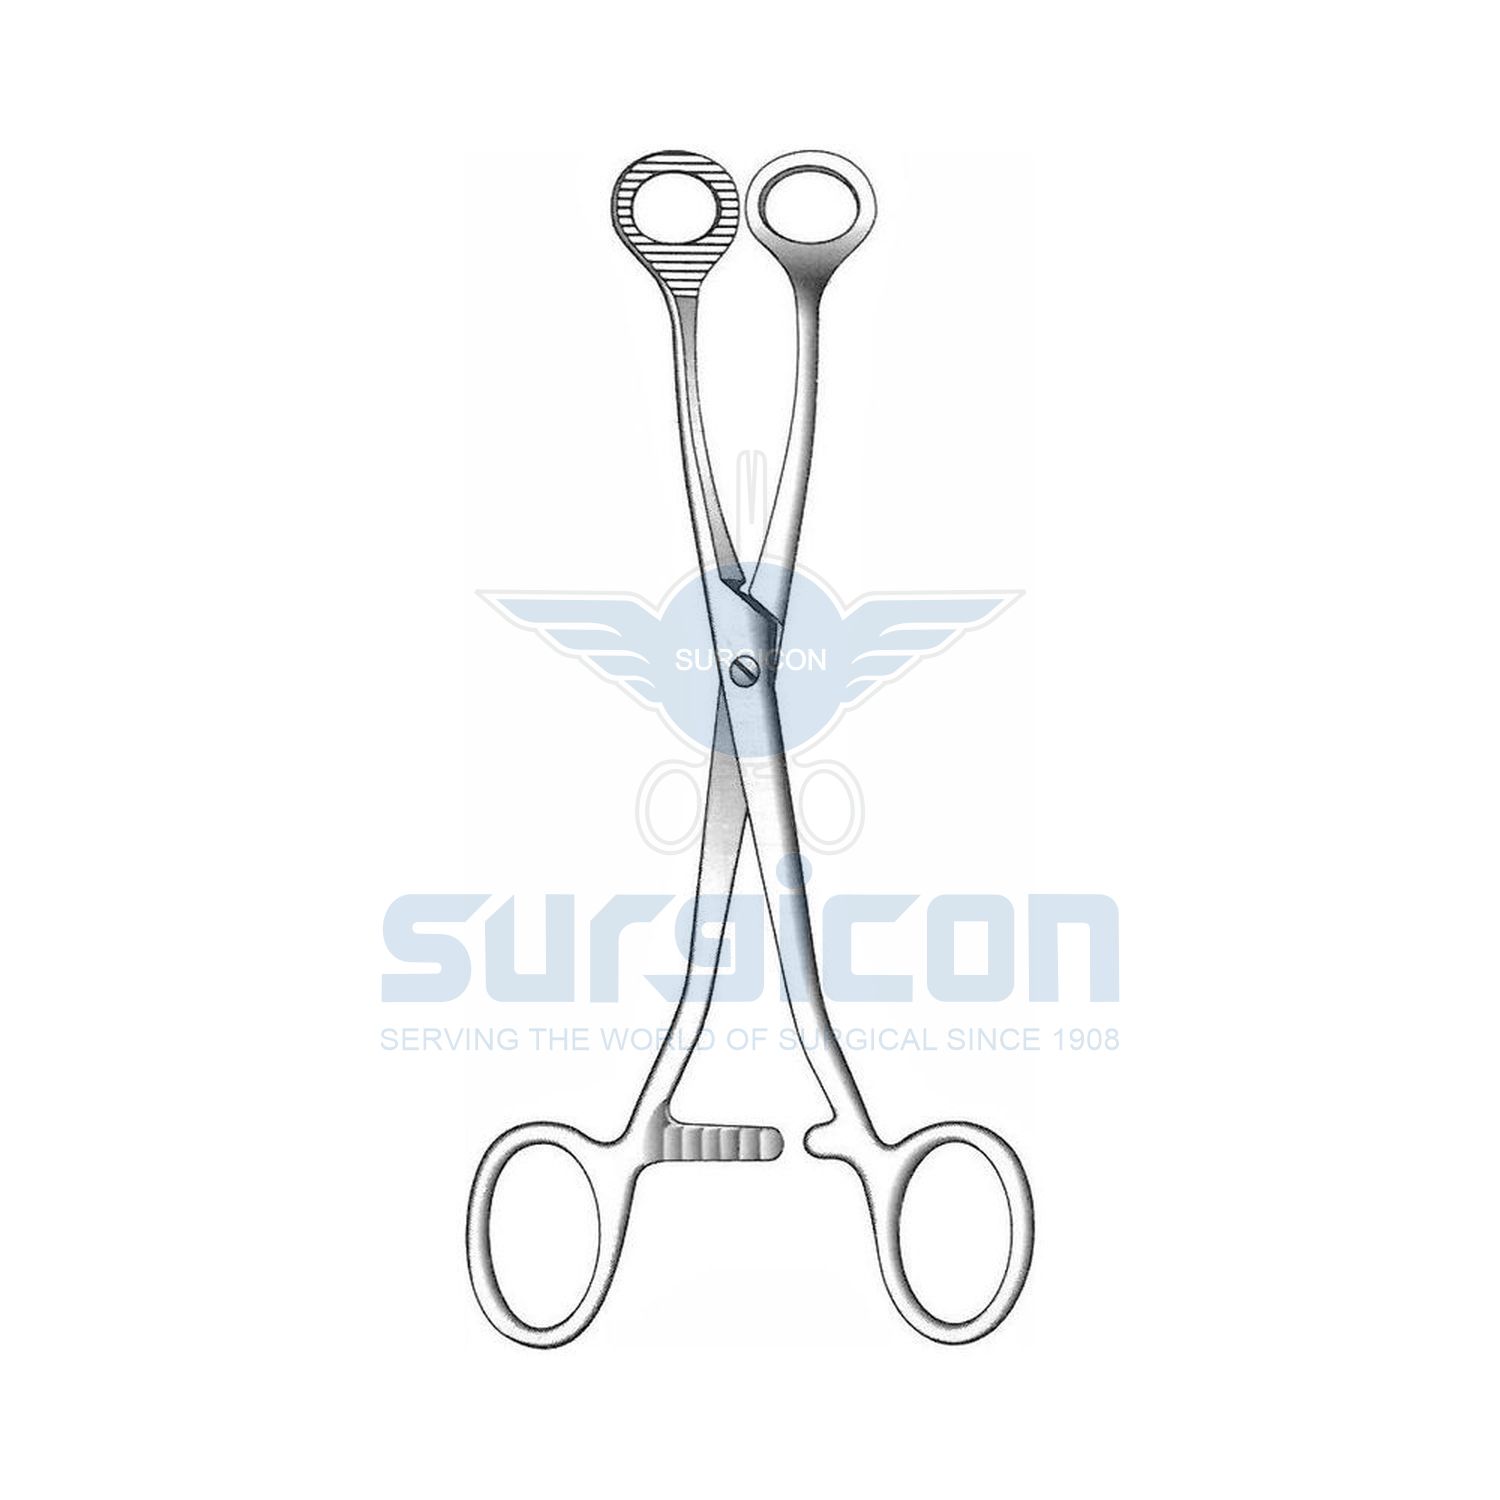 Collin-Tongue-Holding-Forcep-J-33-500